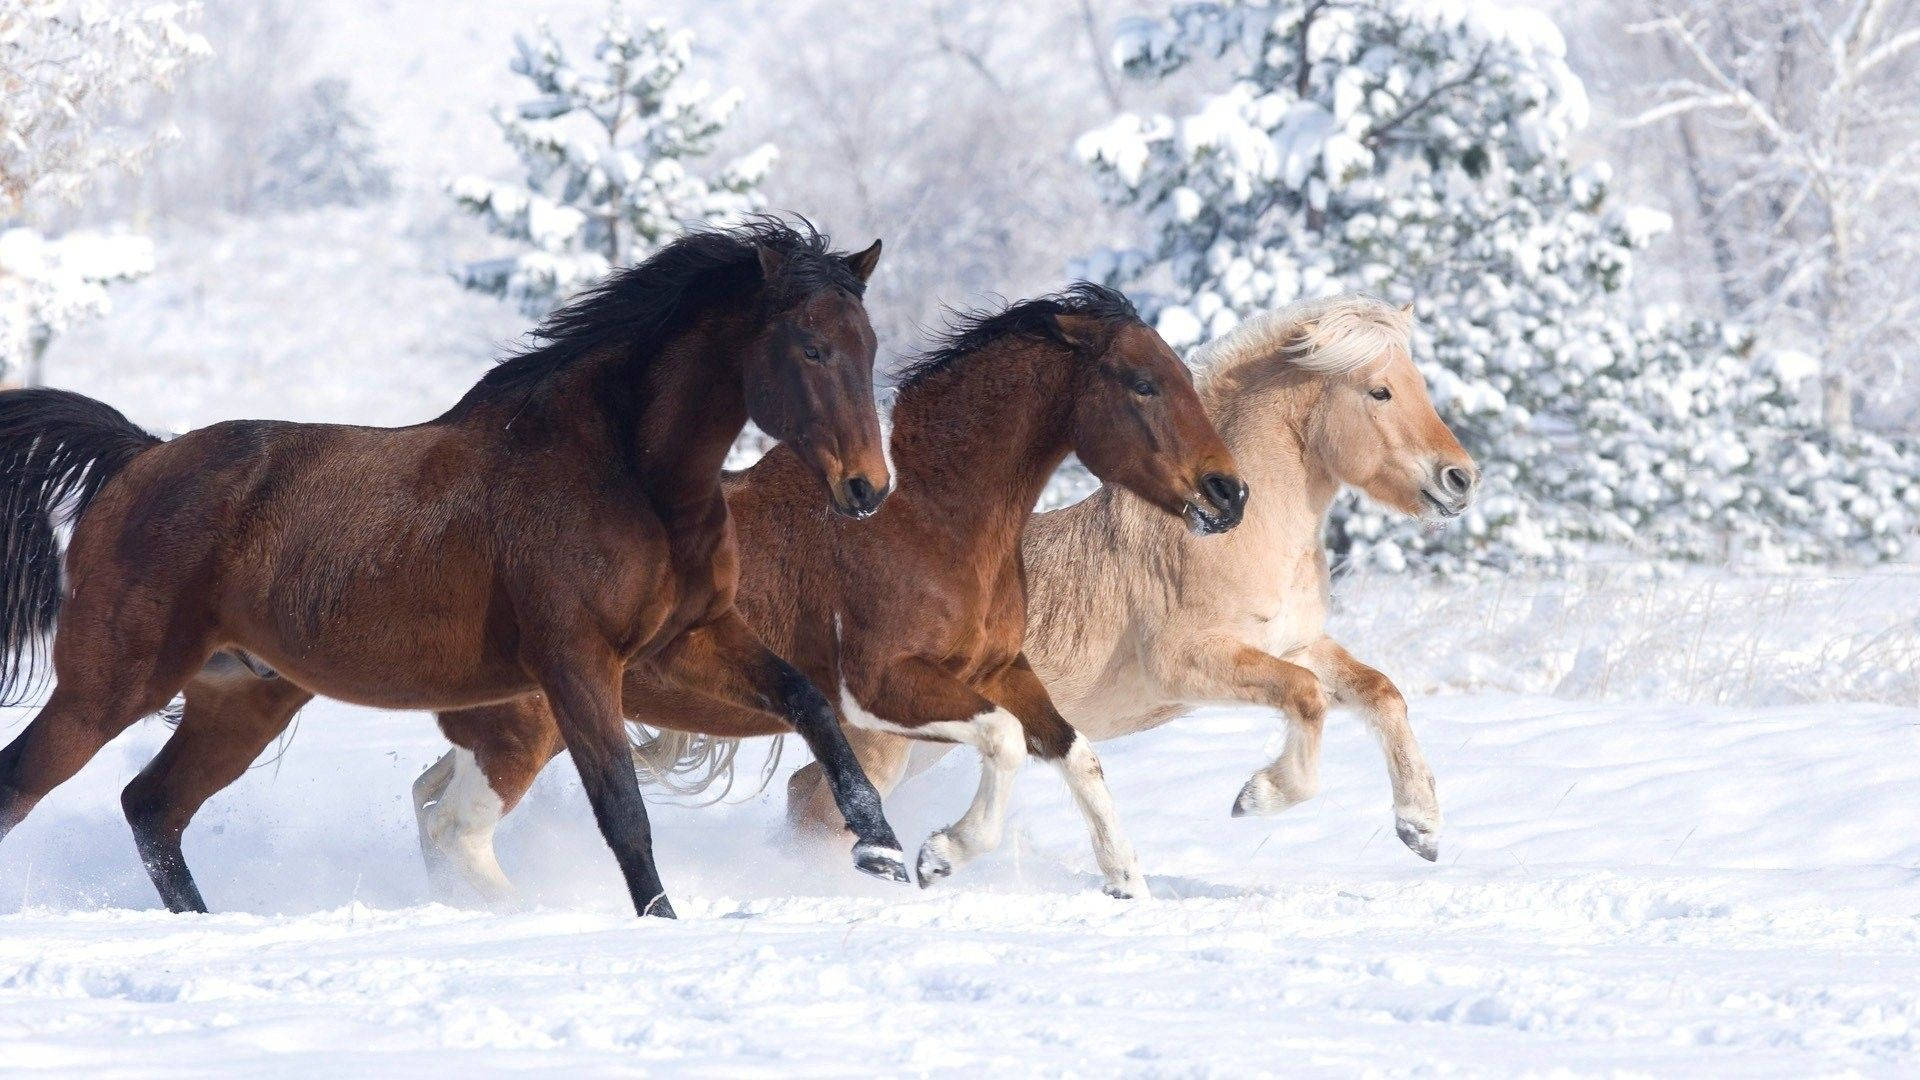 Cute Horses In Snowy Forest Background